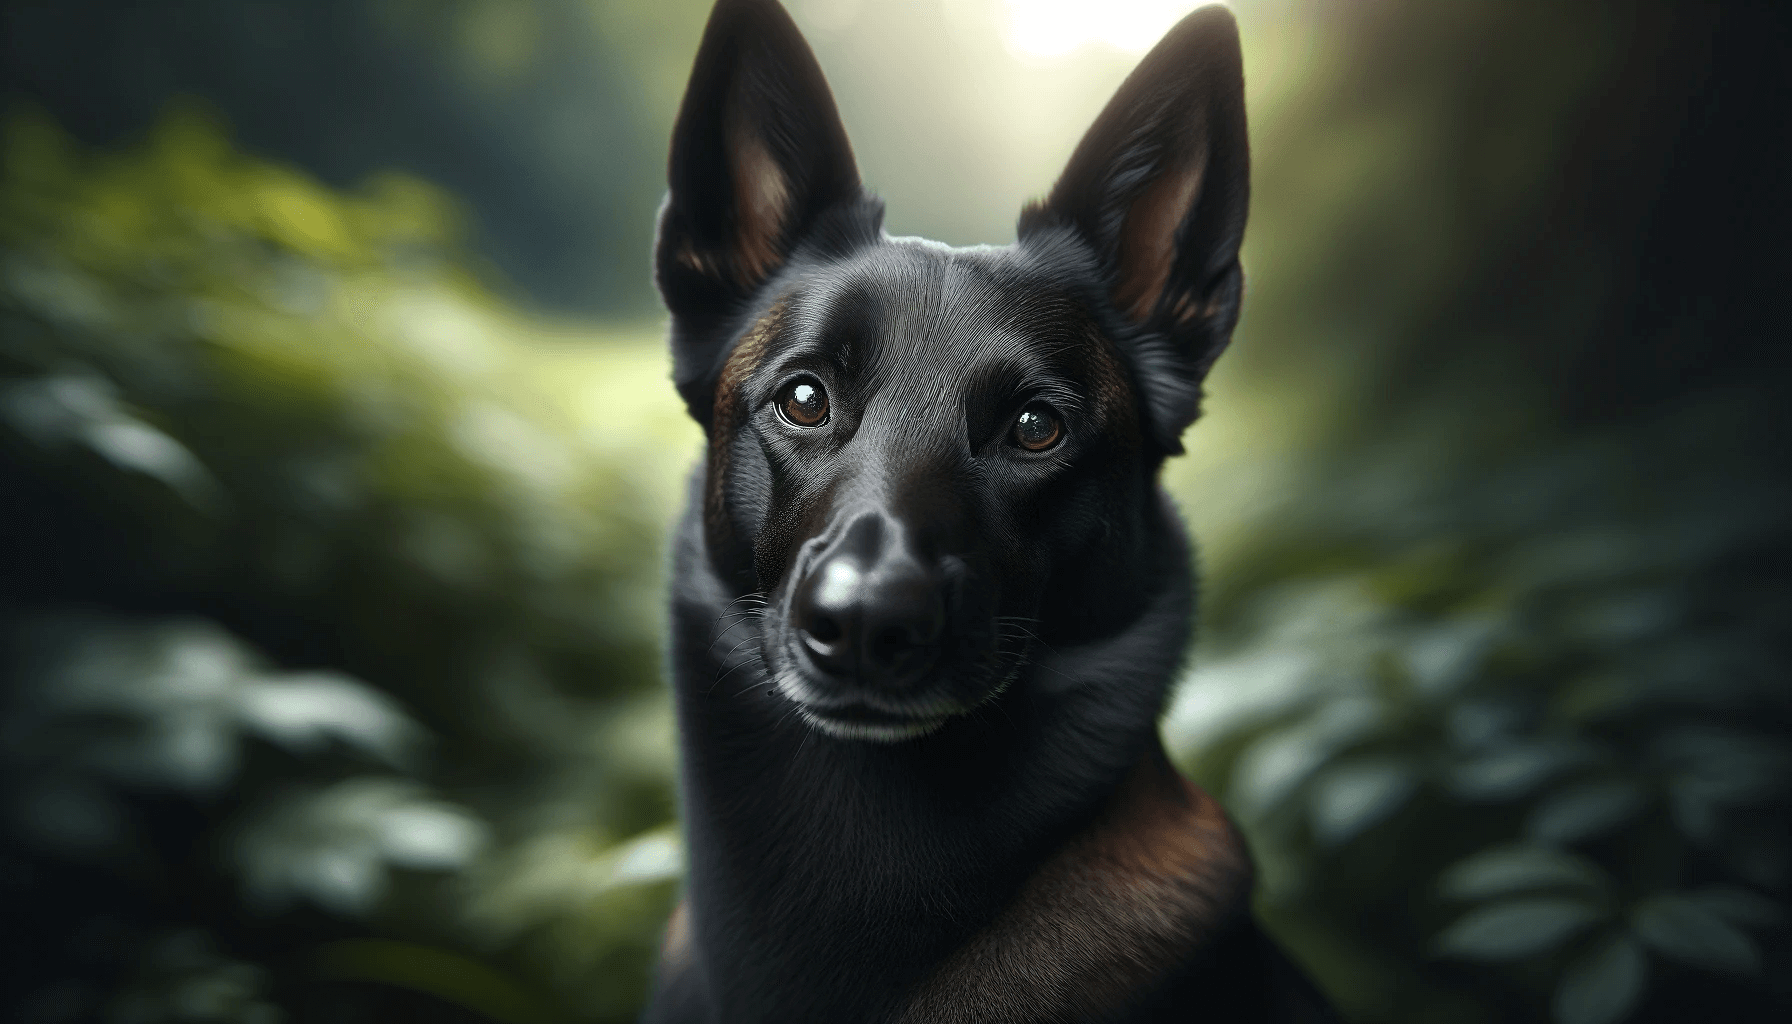 Rare Black Belgian Malinois with a shiny coat and alert expression sitting in a natural setting with diffused lighting.